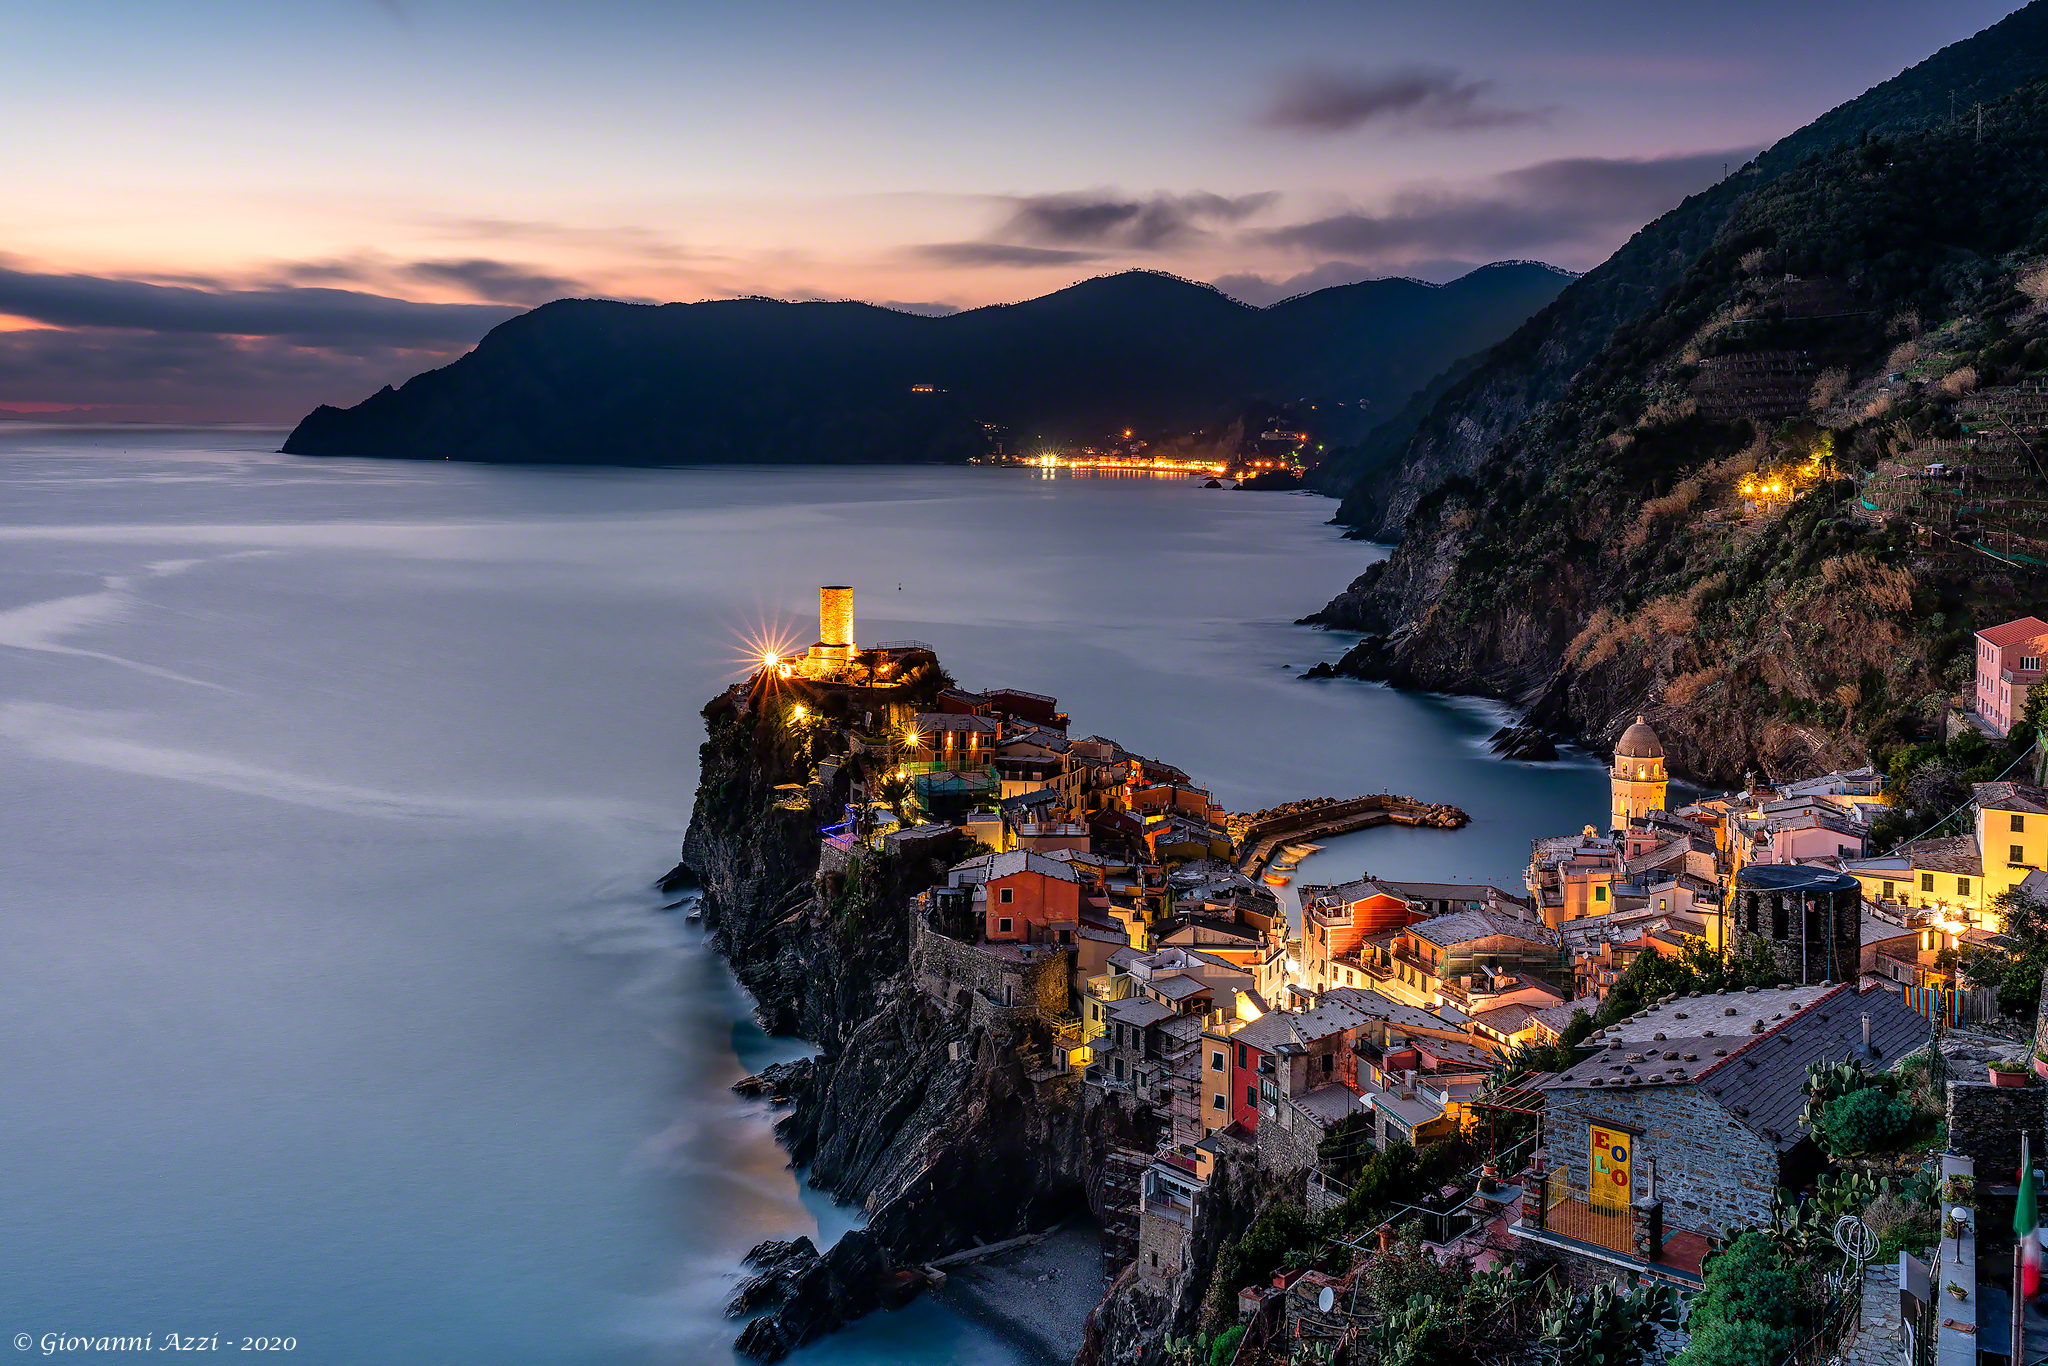 The evening of Vernazza...